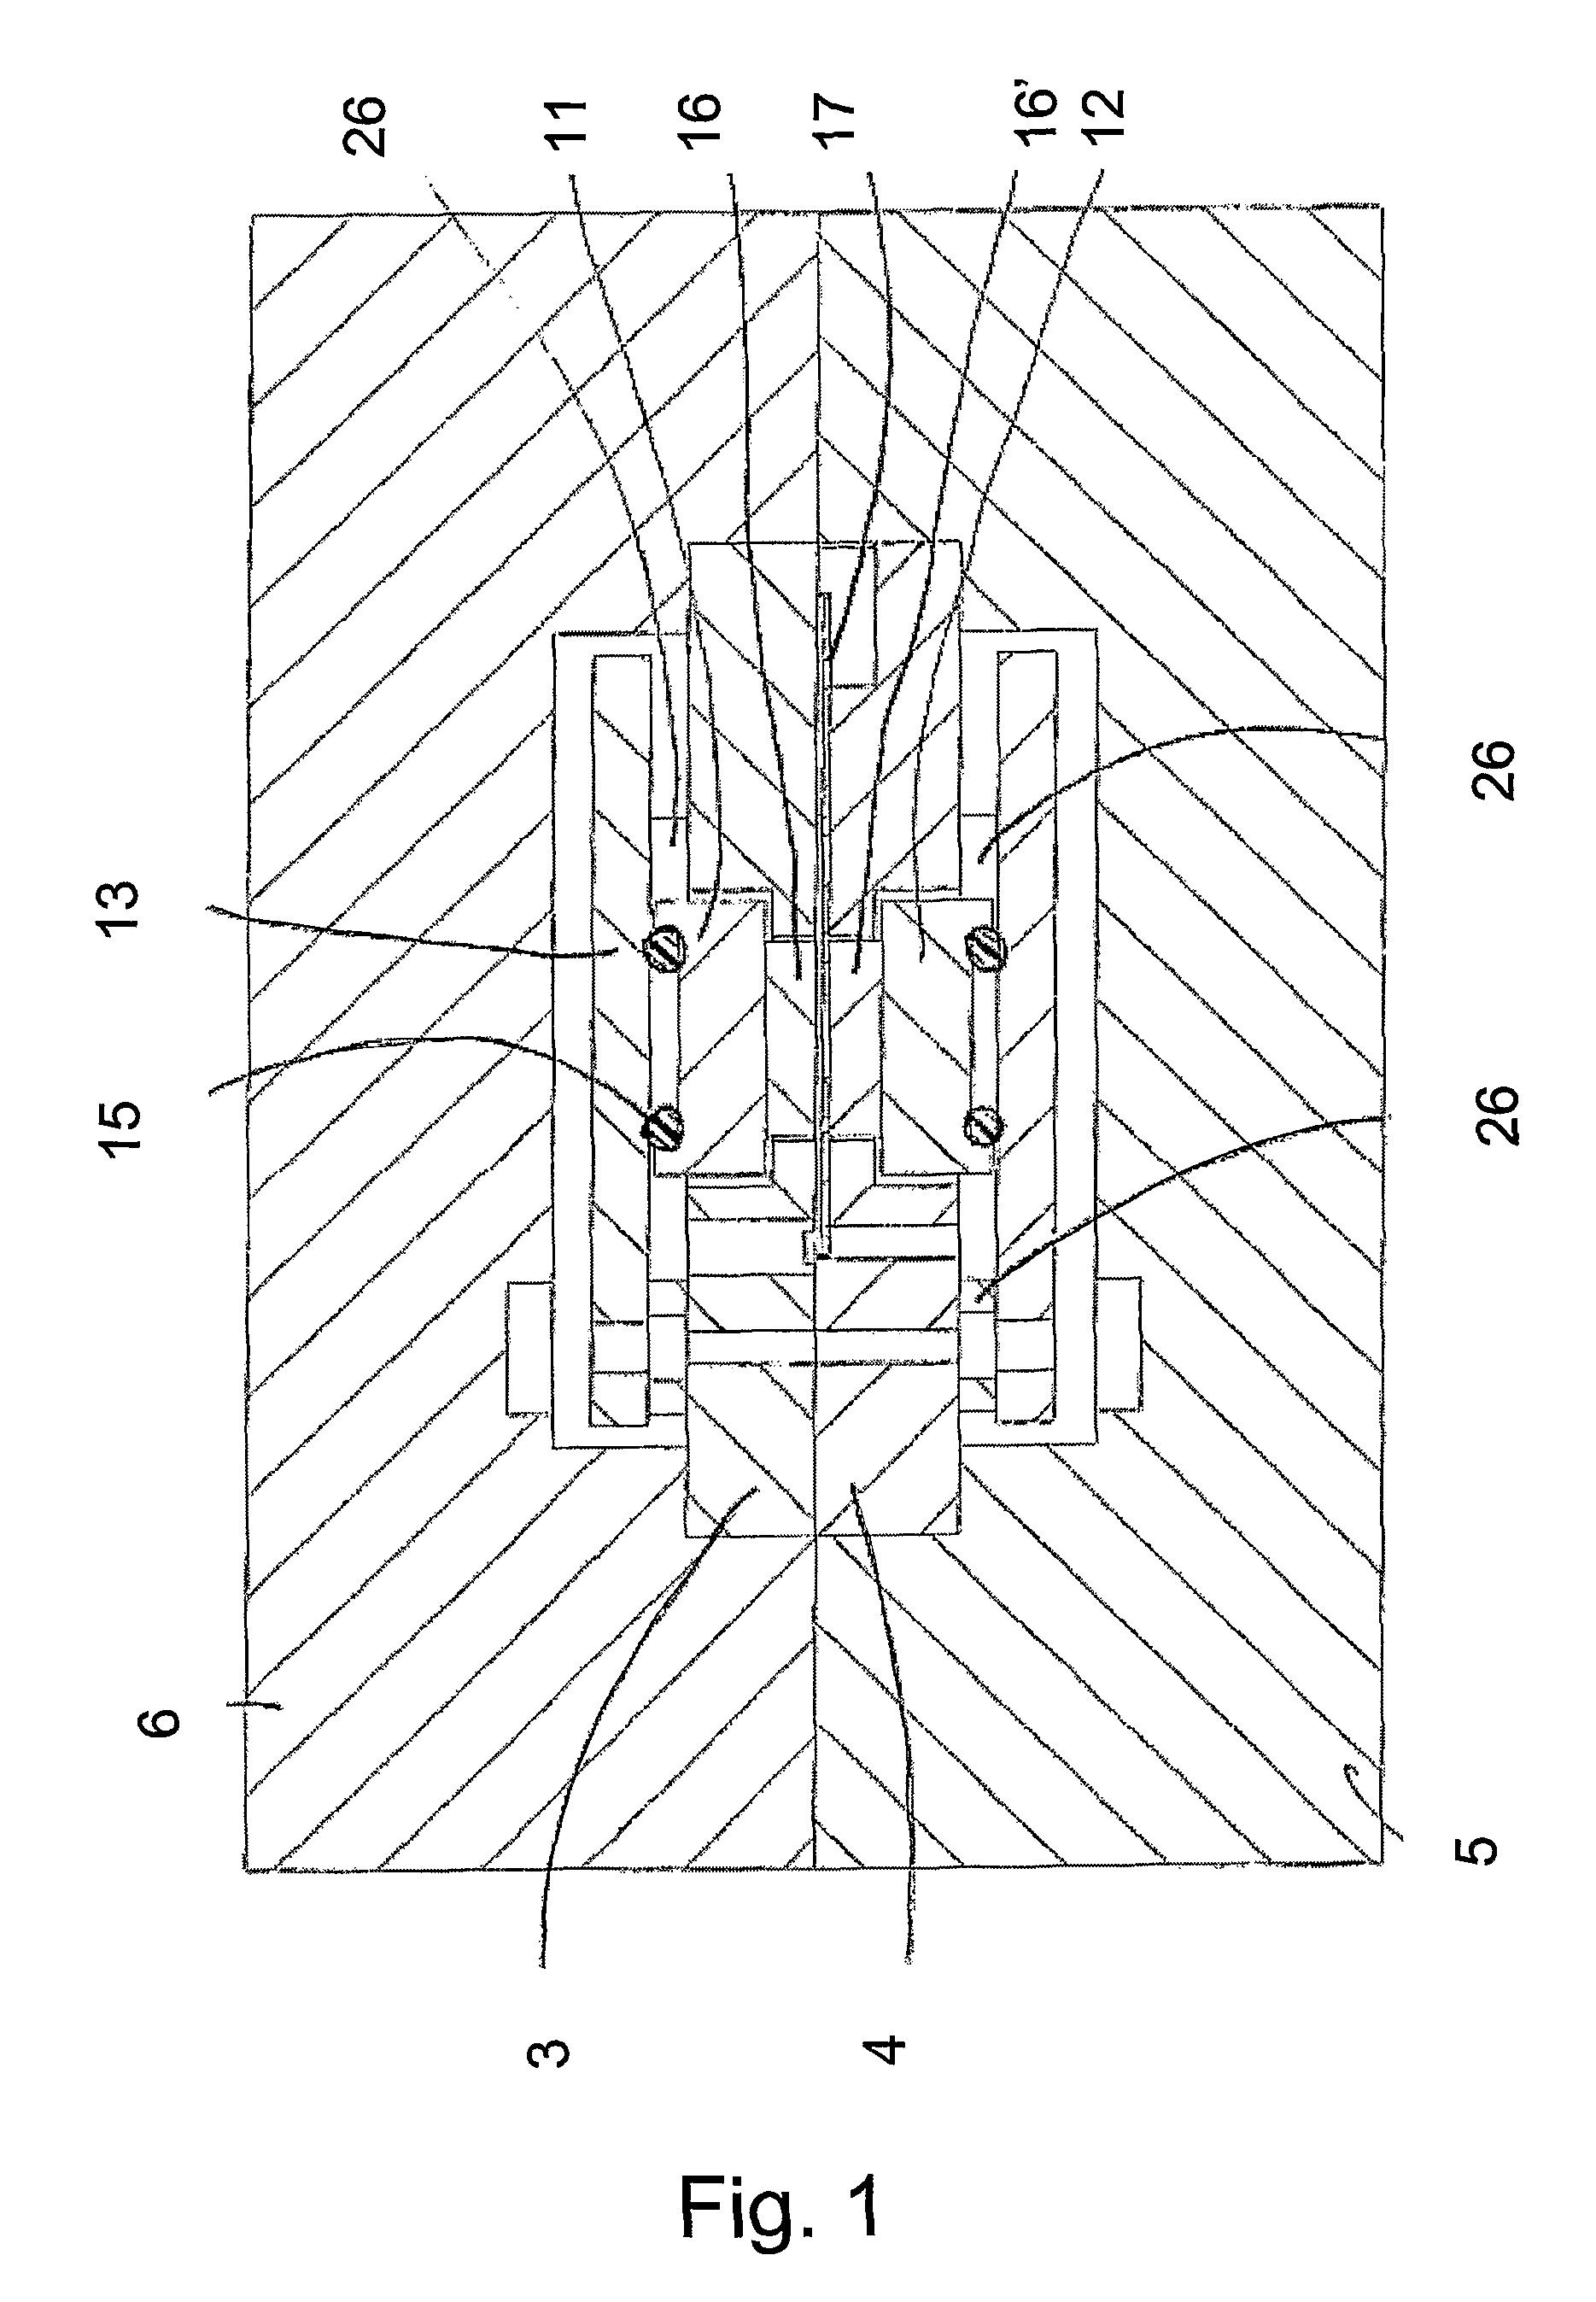 Biosensor apparatus for detection of thermal flow